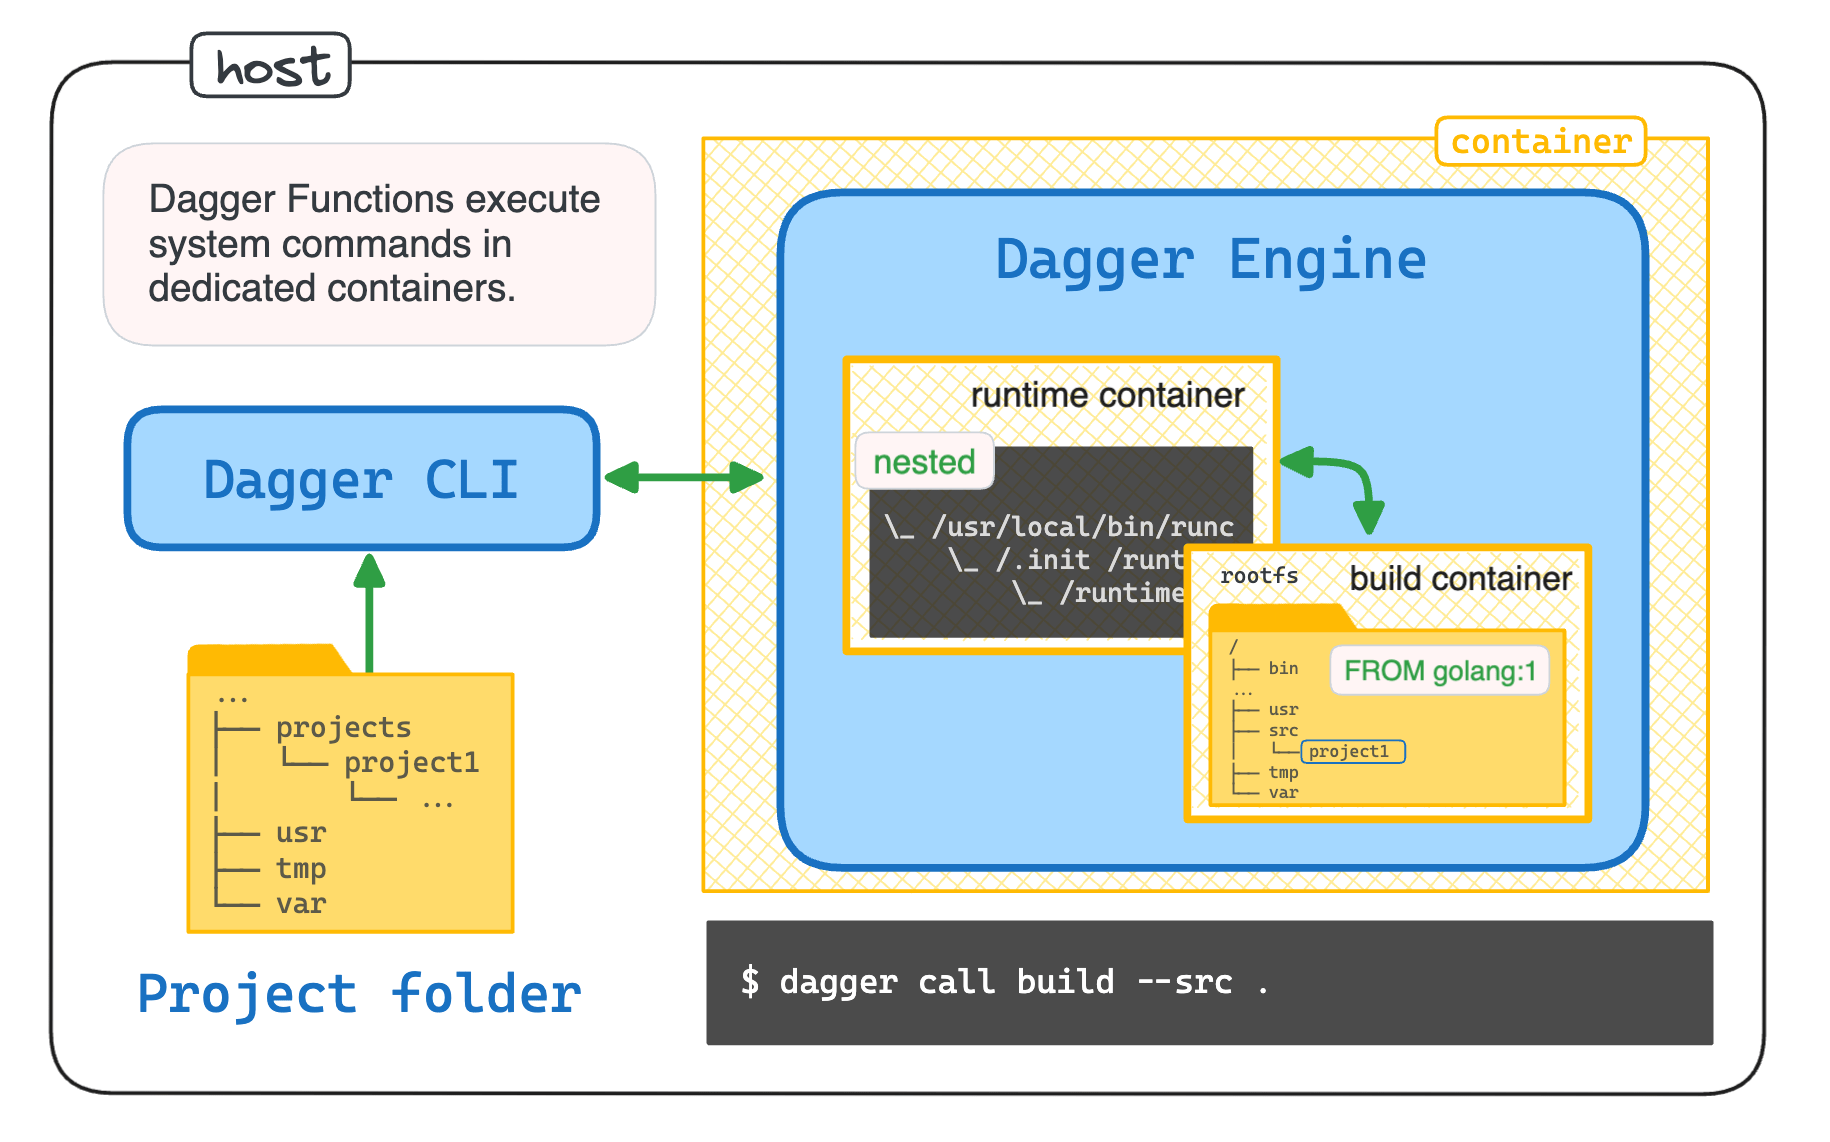 Dagger Functions execute system commands in dedicated containers.